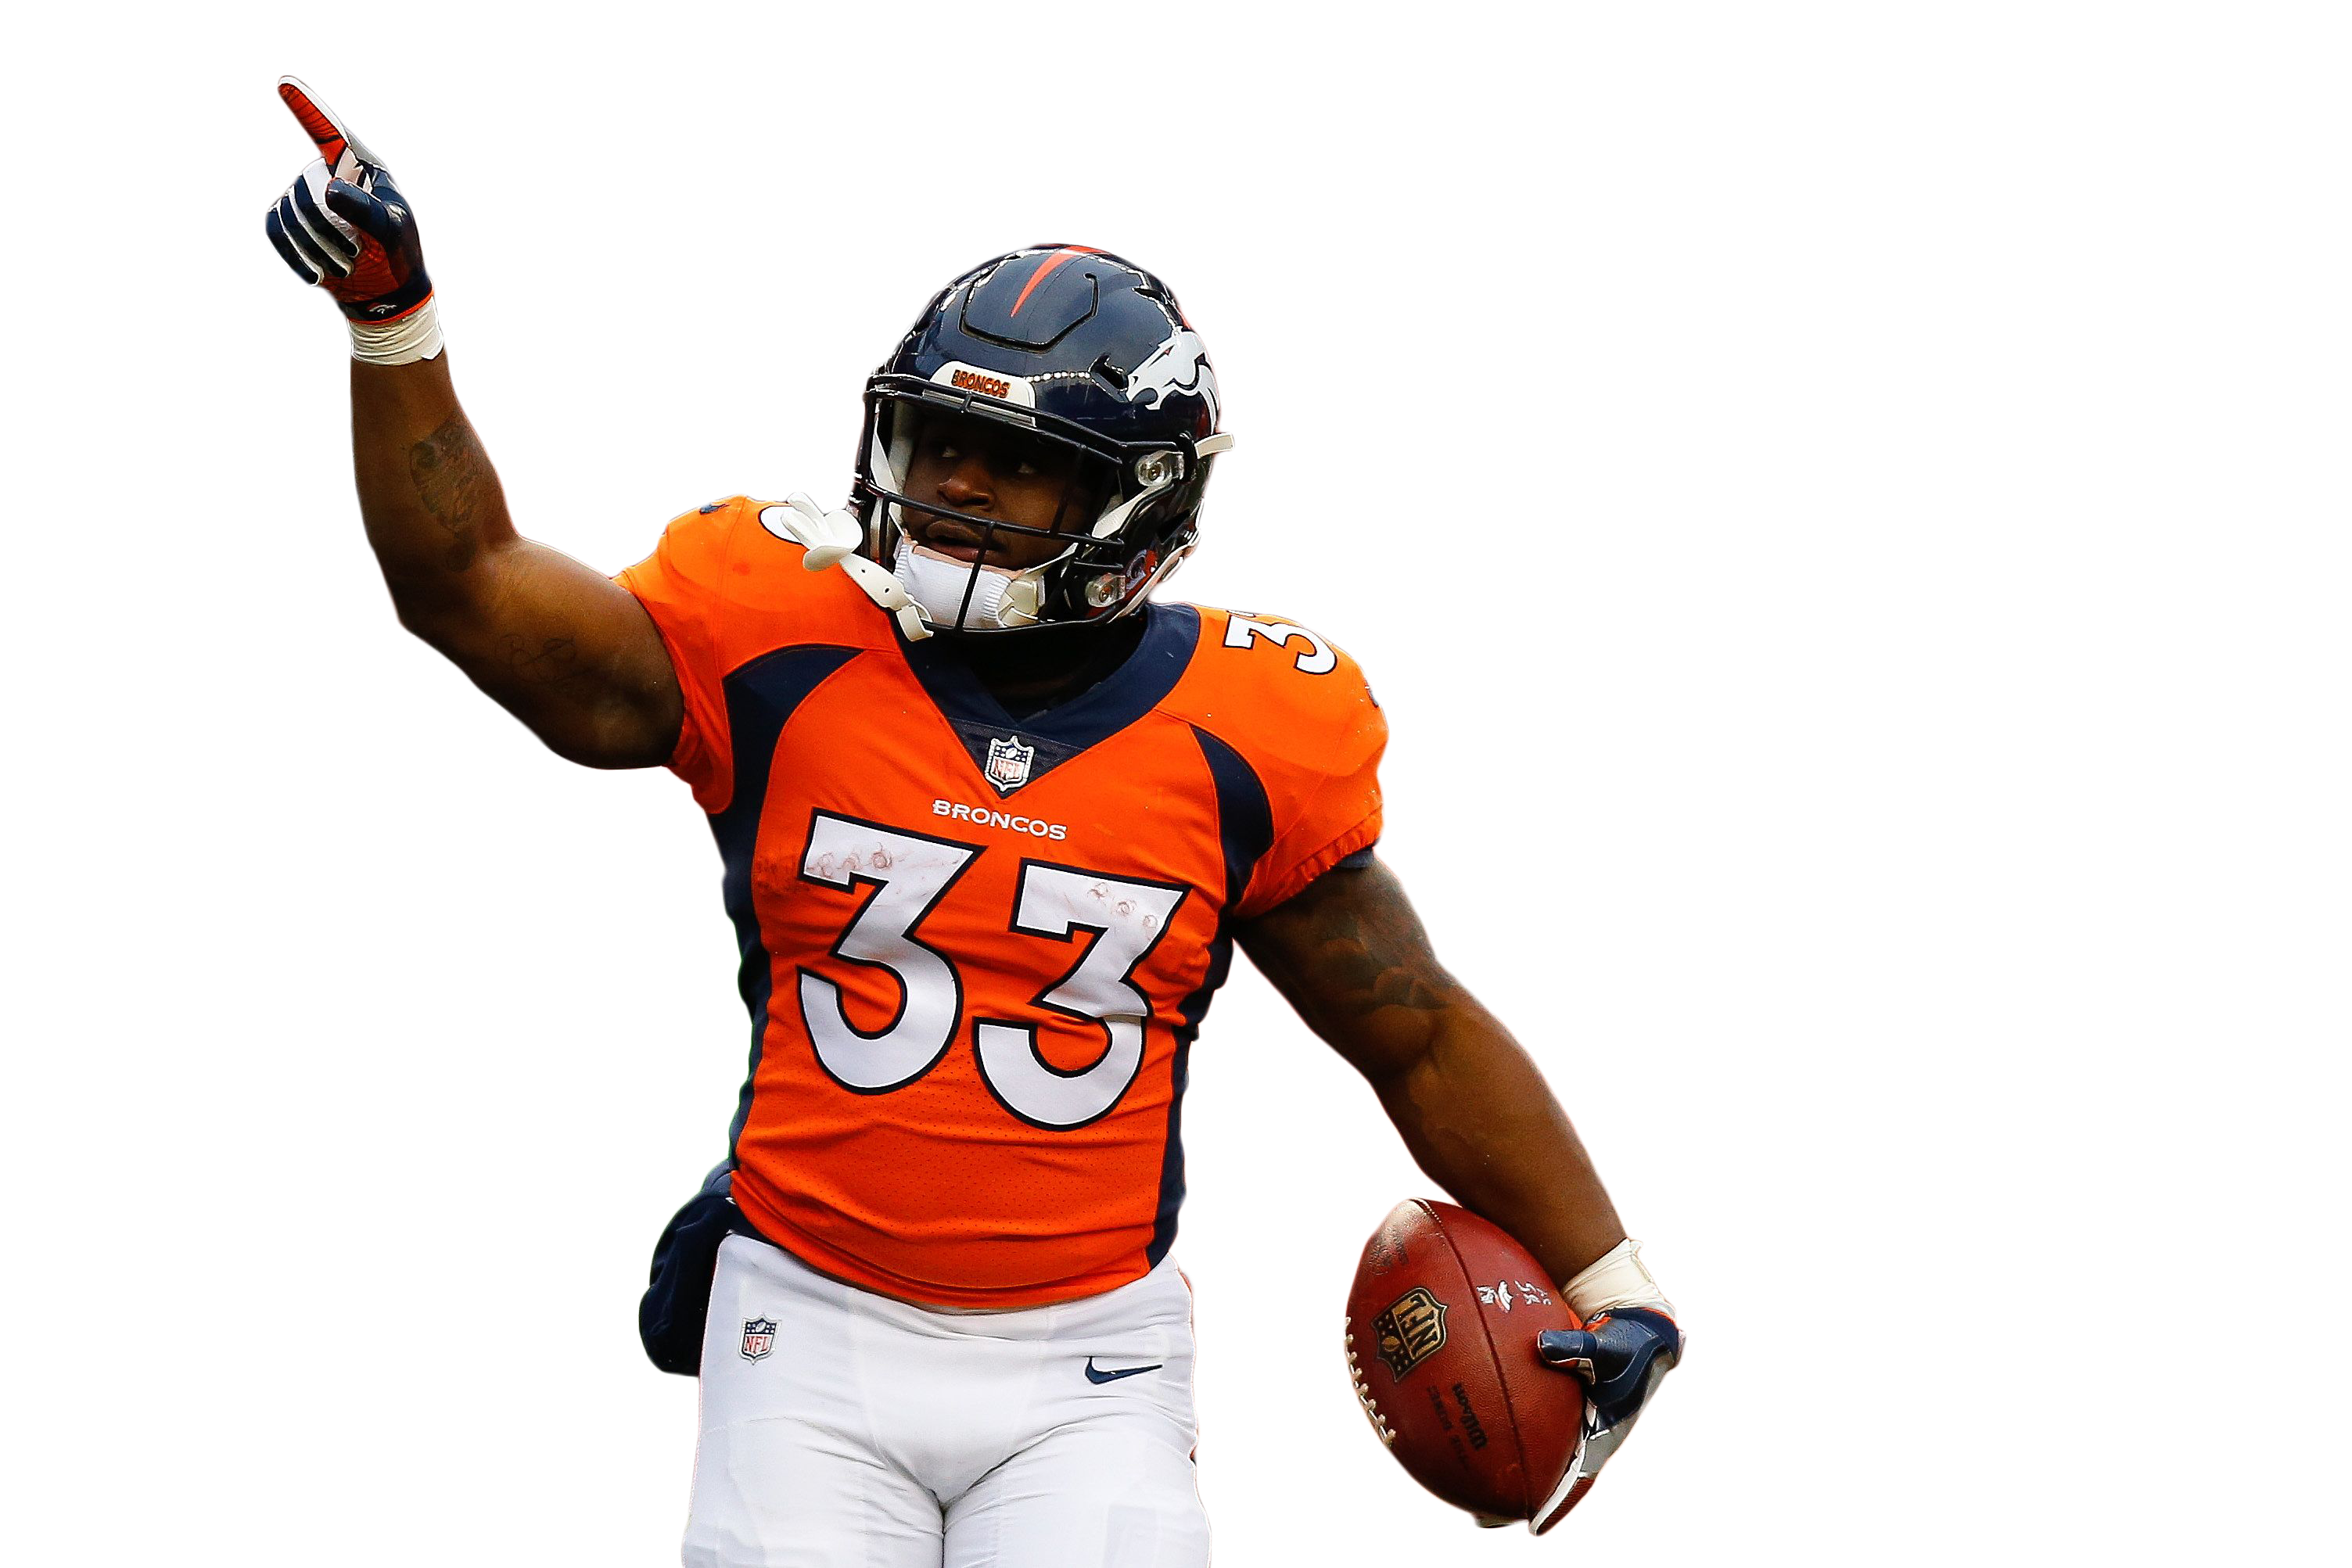 Broncos Player PNG Image